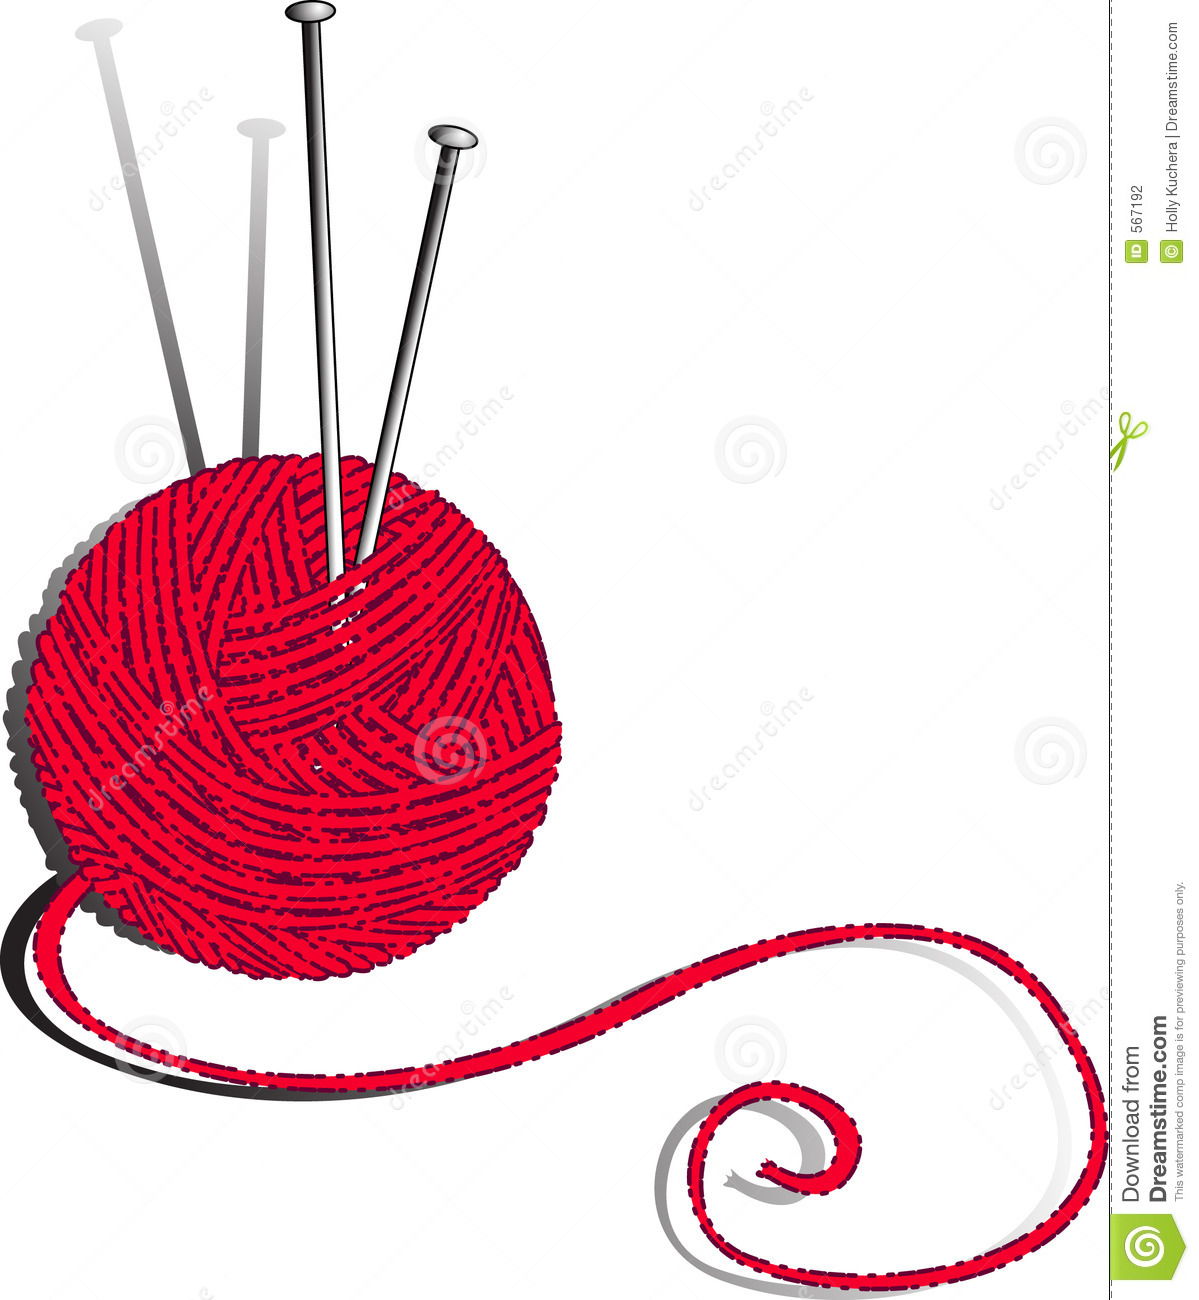 Red Ball Of Yarn And Knitting Needles Stock Photography   Image